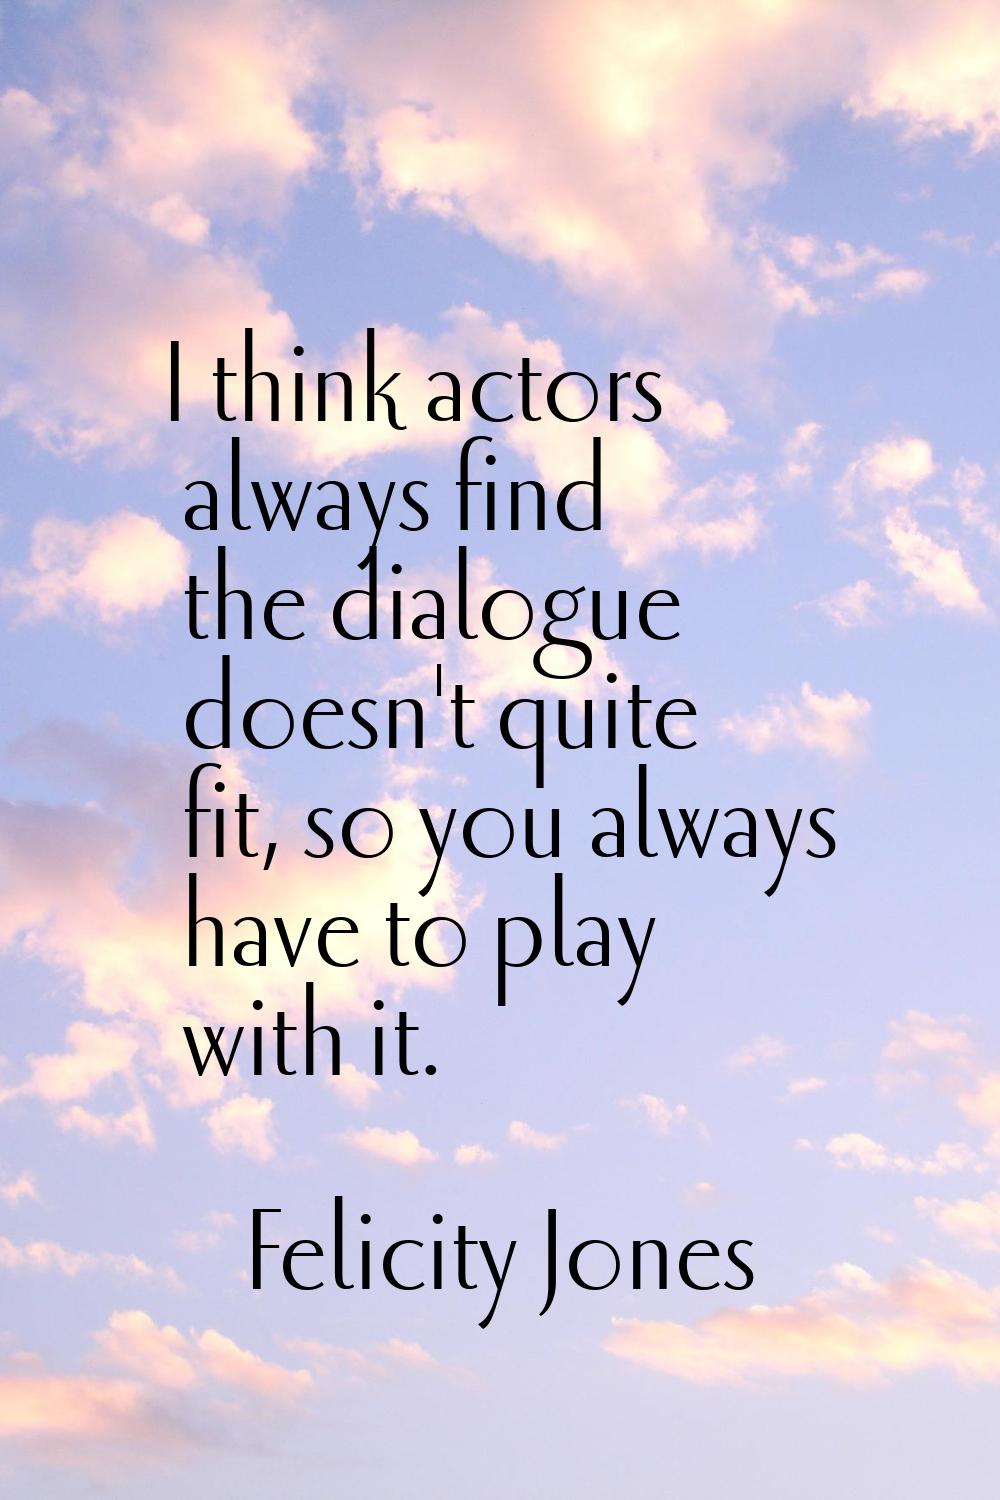 I think actors always find the dialogue doesn't quite fit, so you always have to play with it.